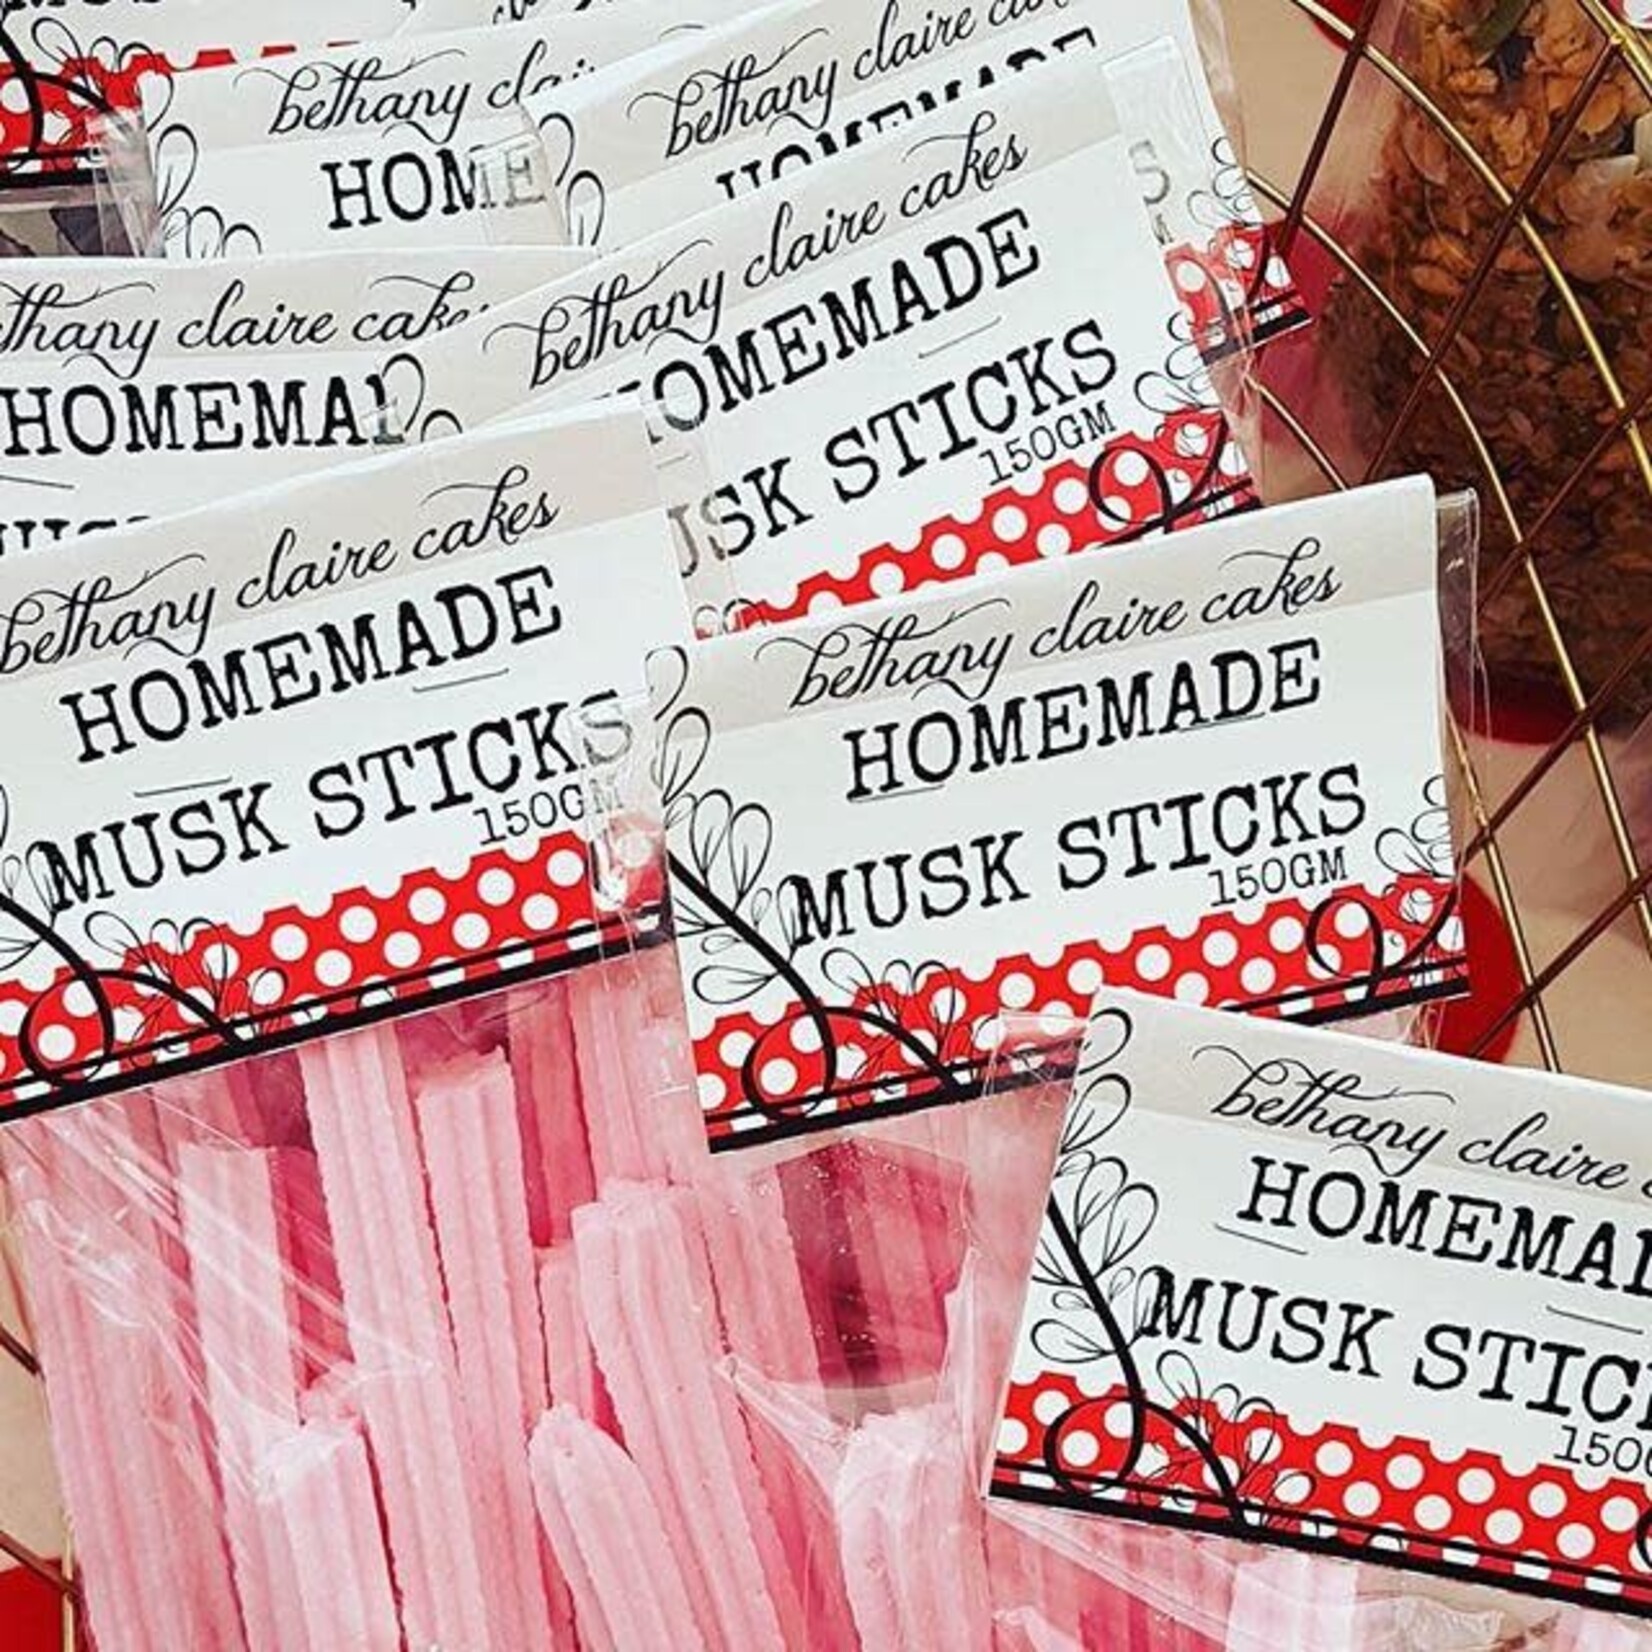 BC Homemade Musk Sticks 150g Bethany Claire